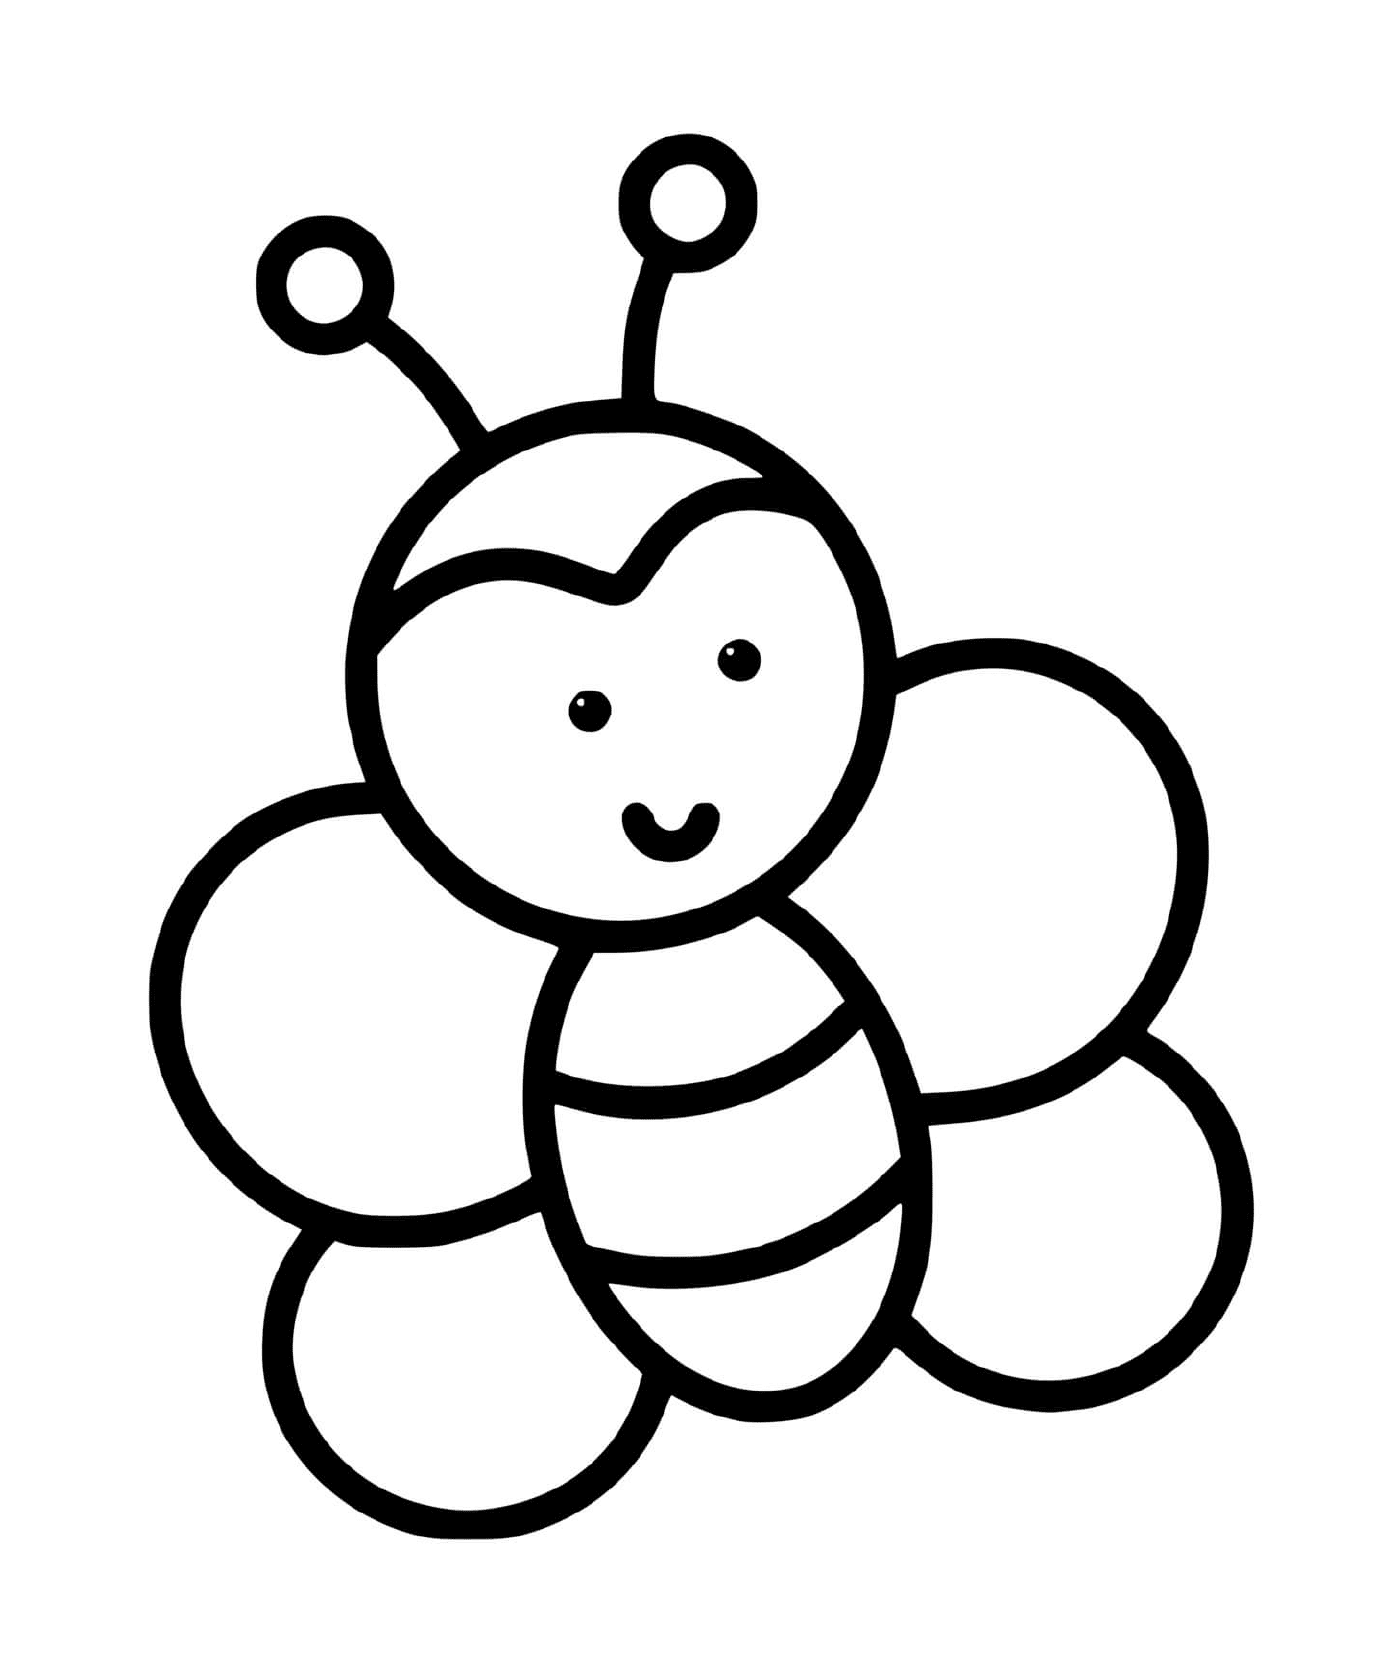  An easy to draw ladybug for 2-year-olds 